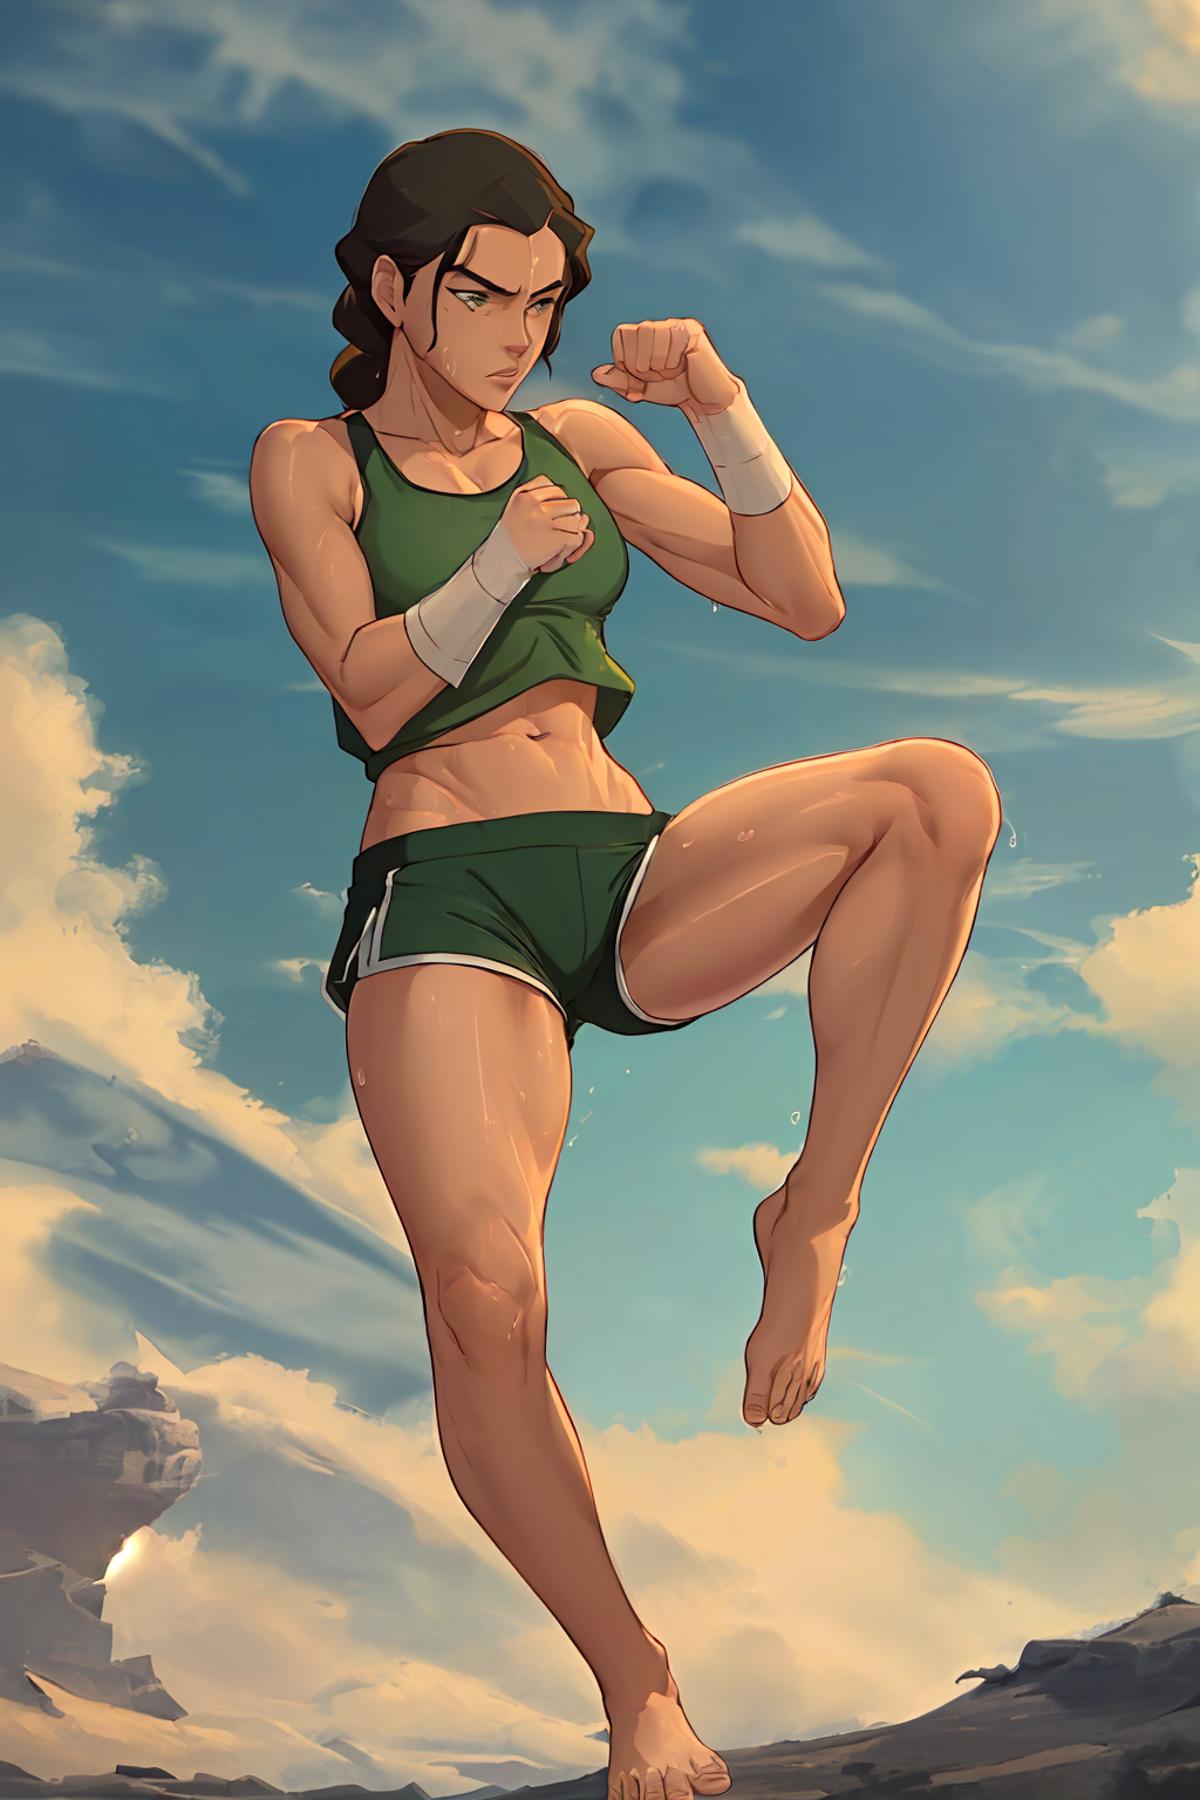 Kuvira from The Legend of Korra image by SirDigsbey